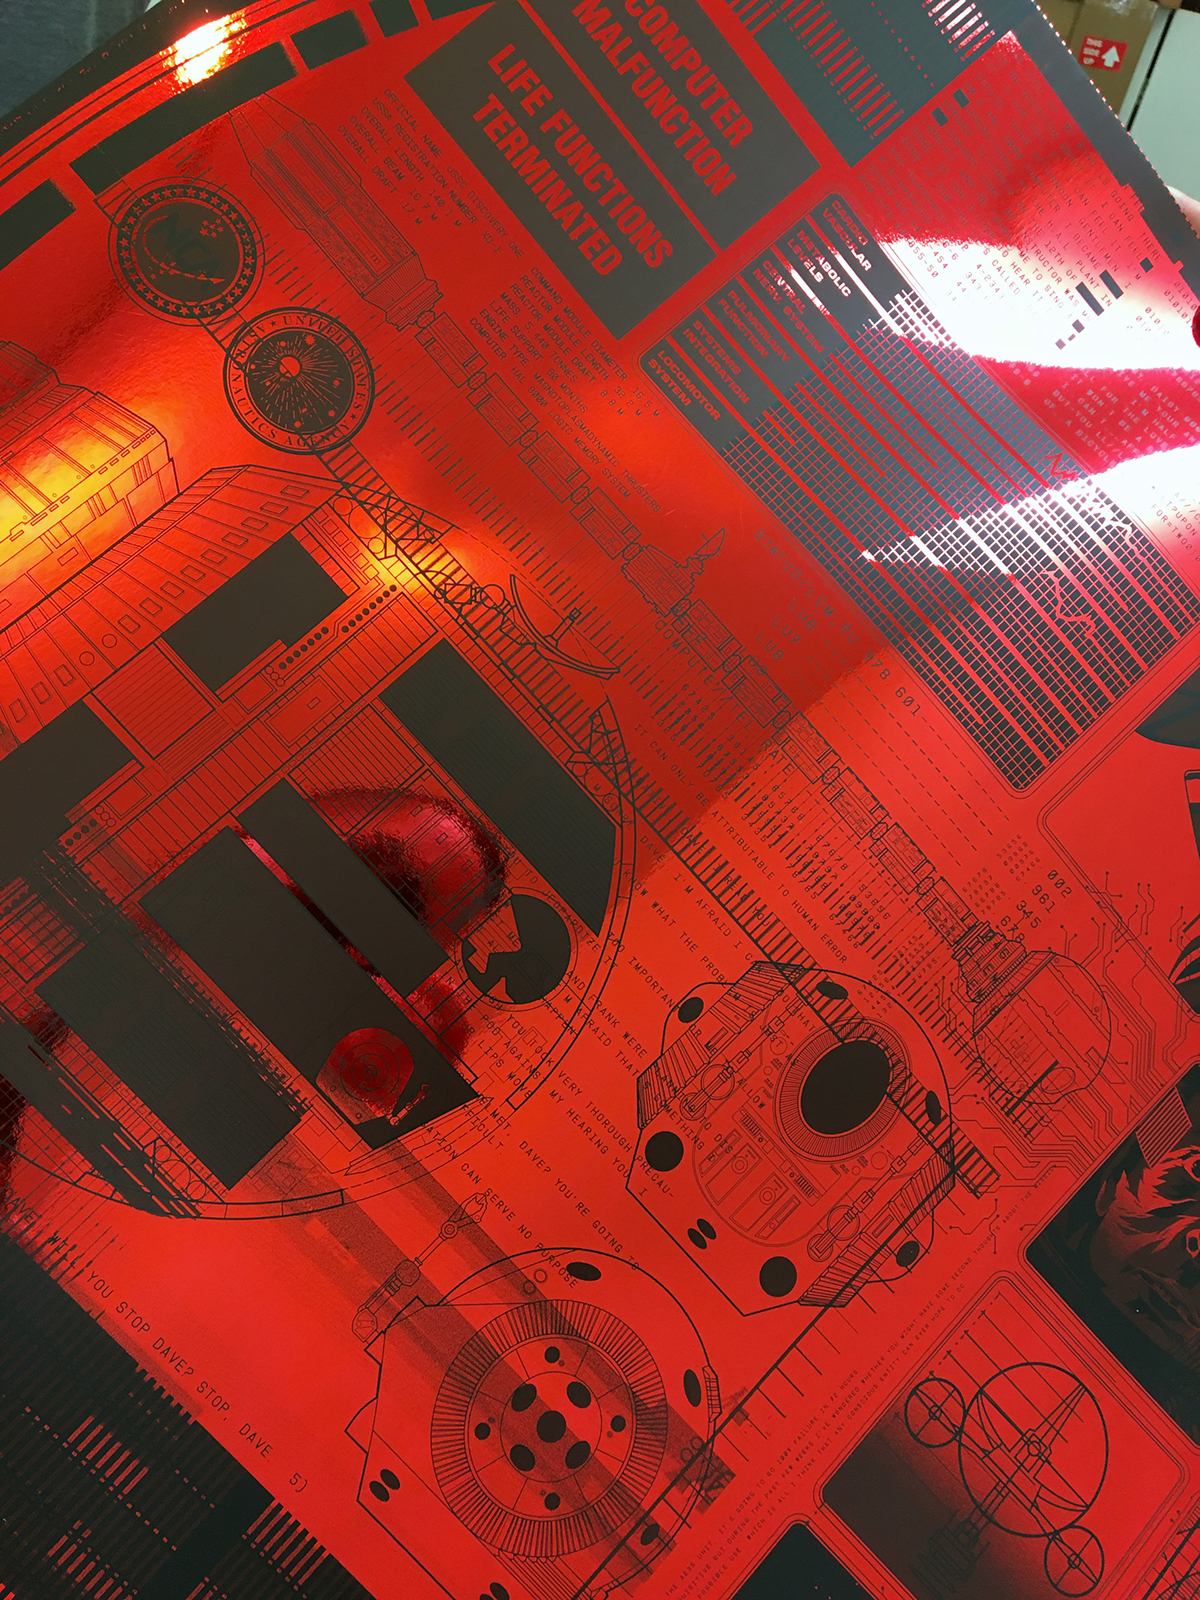 2001 space  odyssey kubruck HAL 9000 dave poster screen print